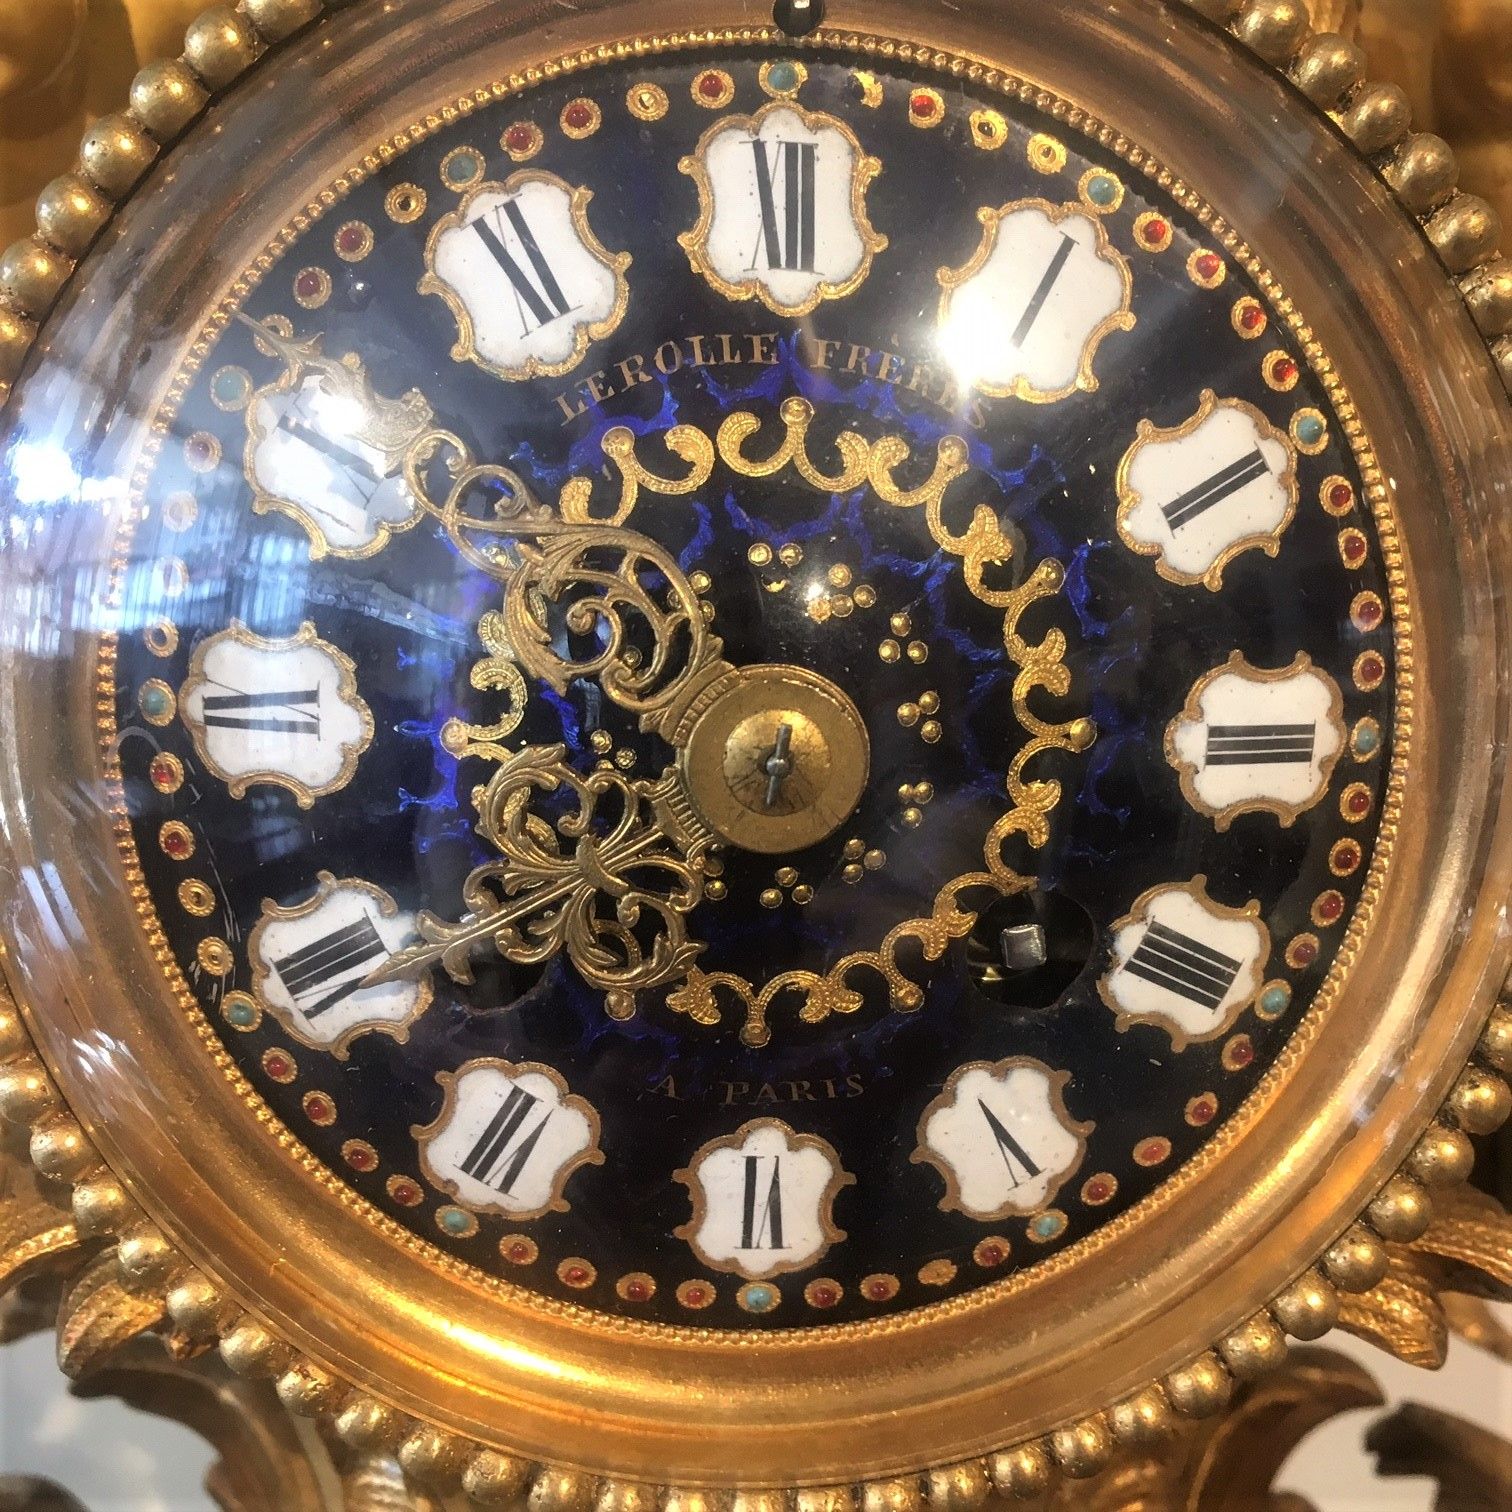 19th Century French Mantle Clock - Mantel Clocks - Hemswell Antique Centres